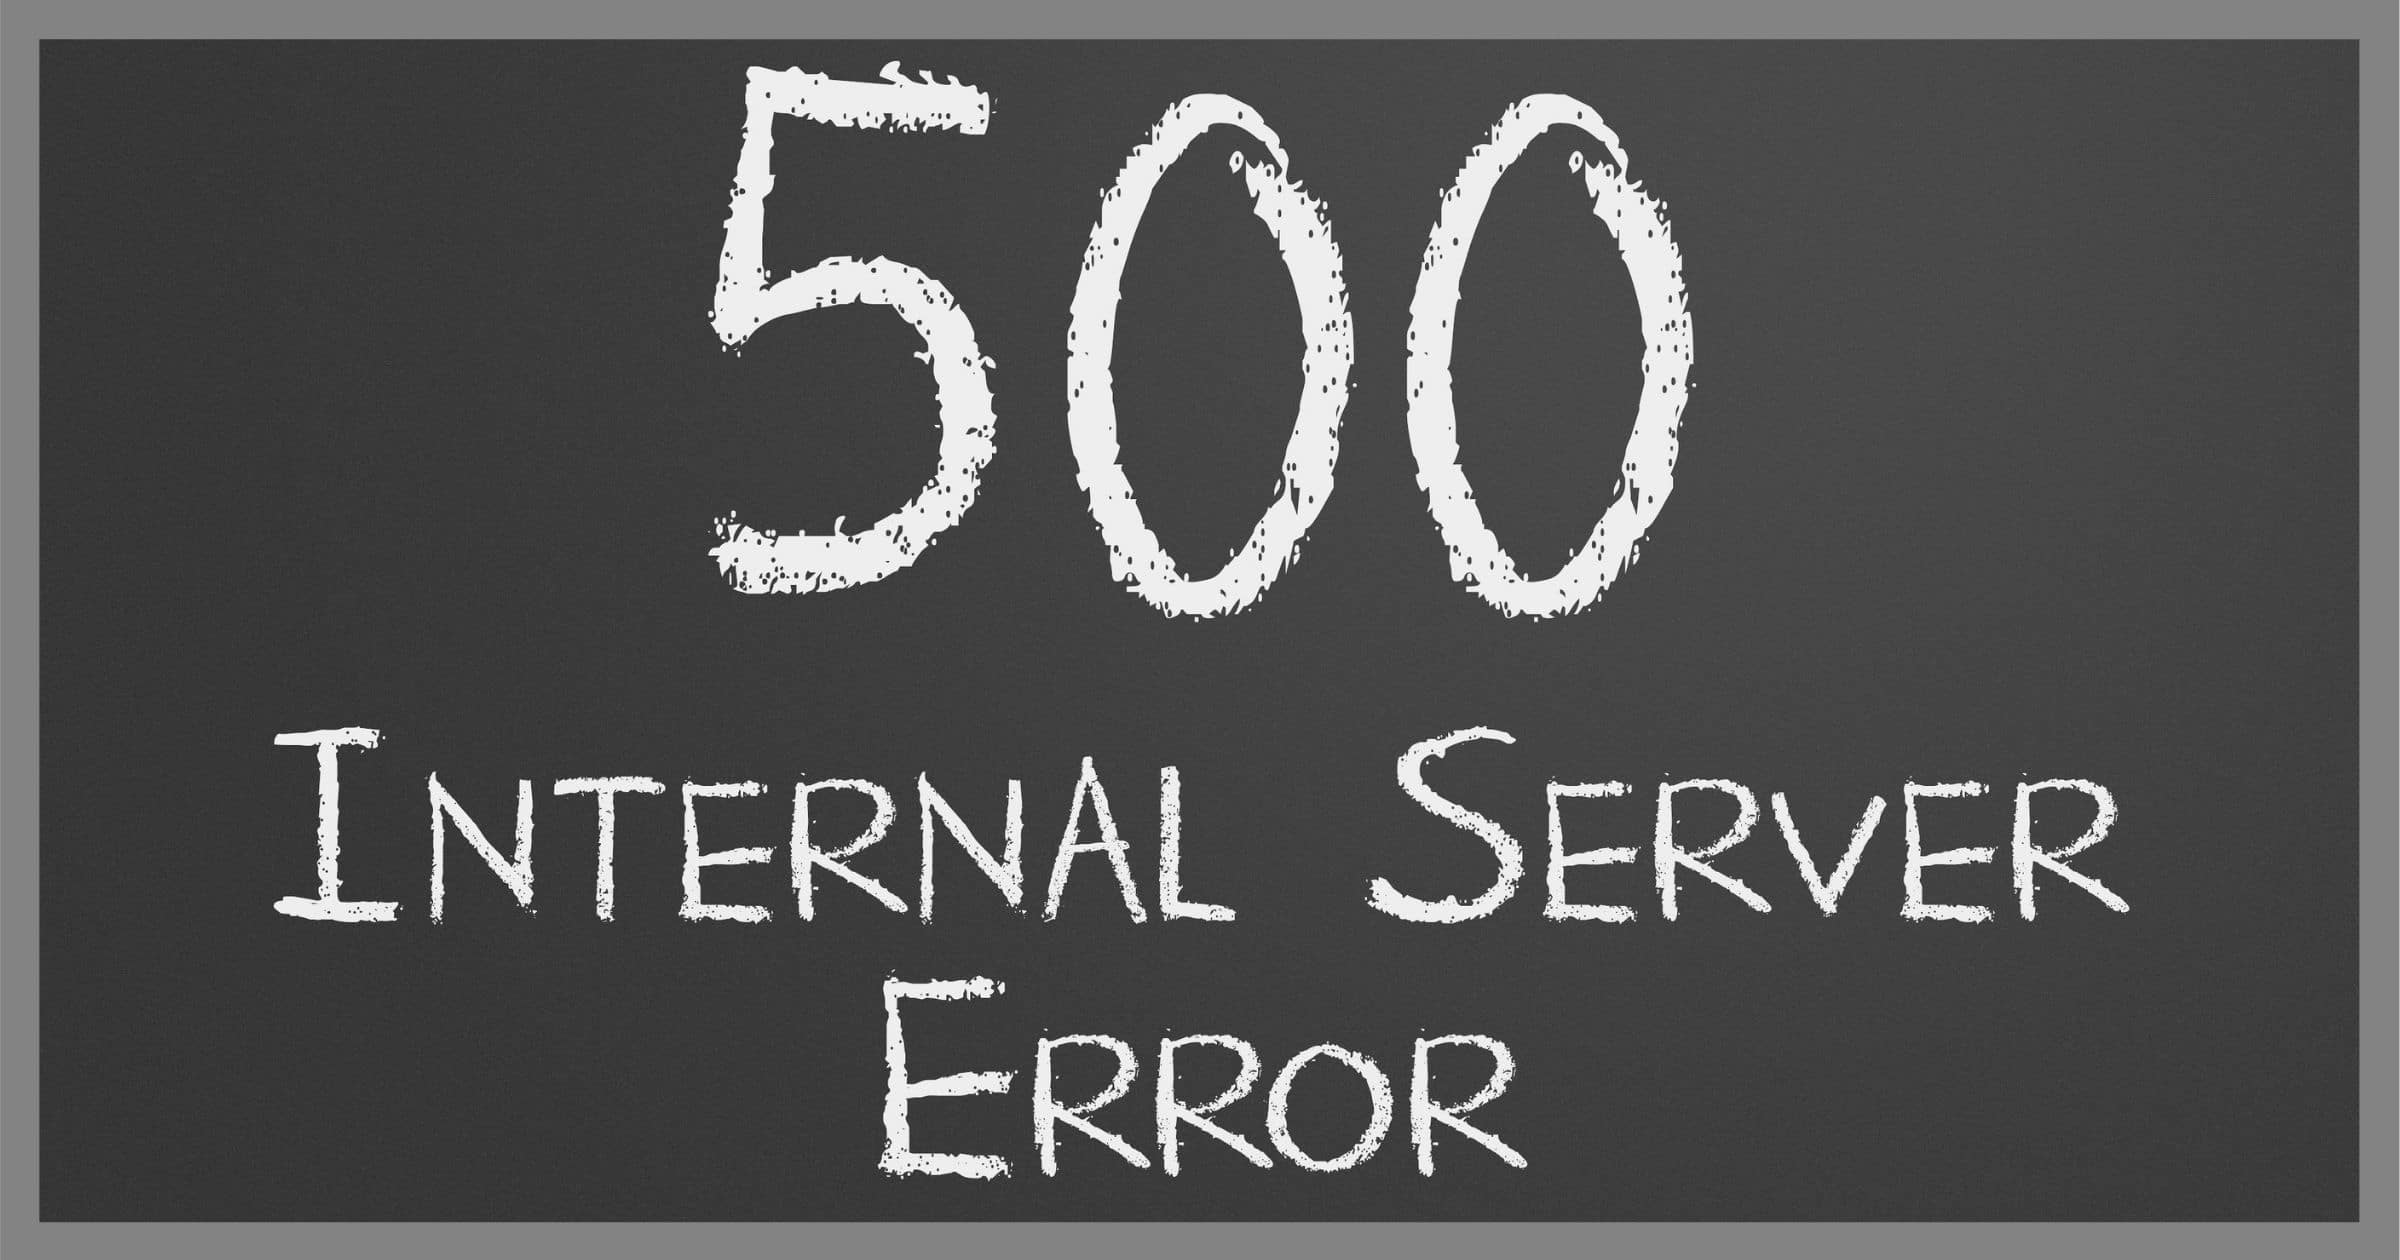 Forbidden (403) error when opening Canva links and managing your